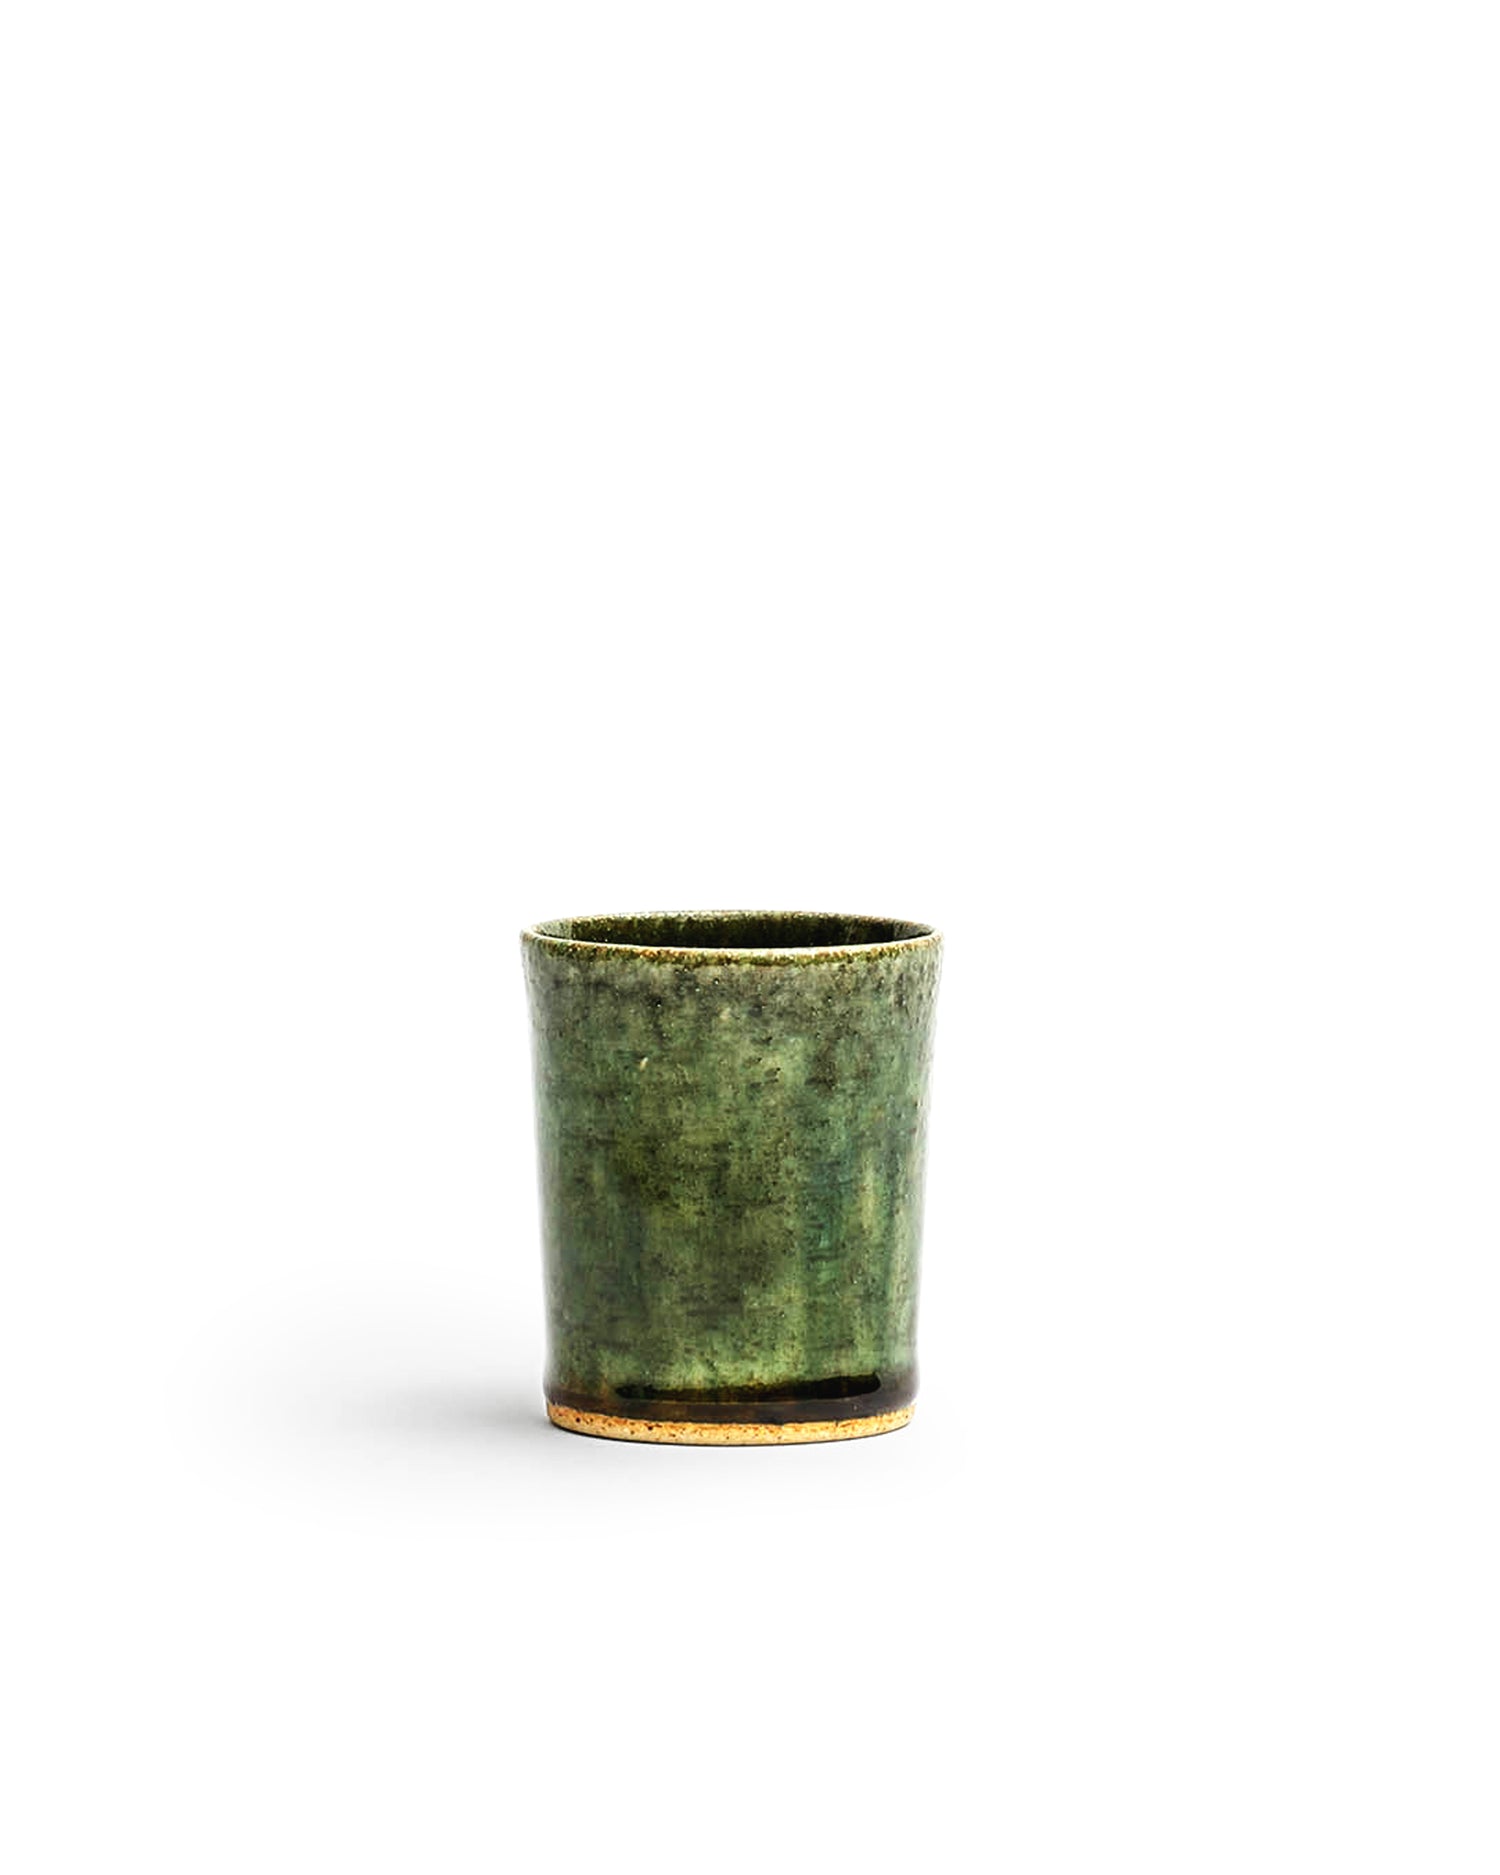 Silhouetted image of ceramic oribe drinking vessel with deep green glaze by Time and Style against white background.